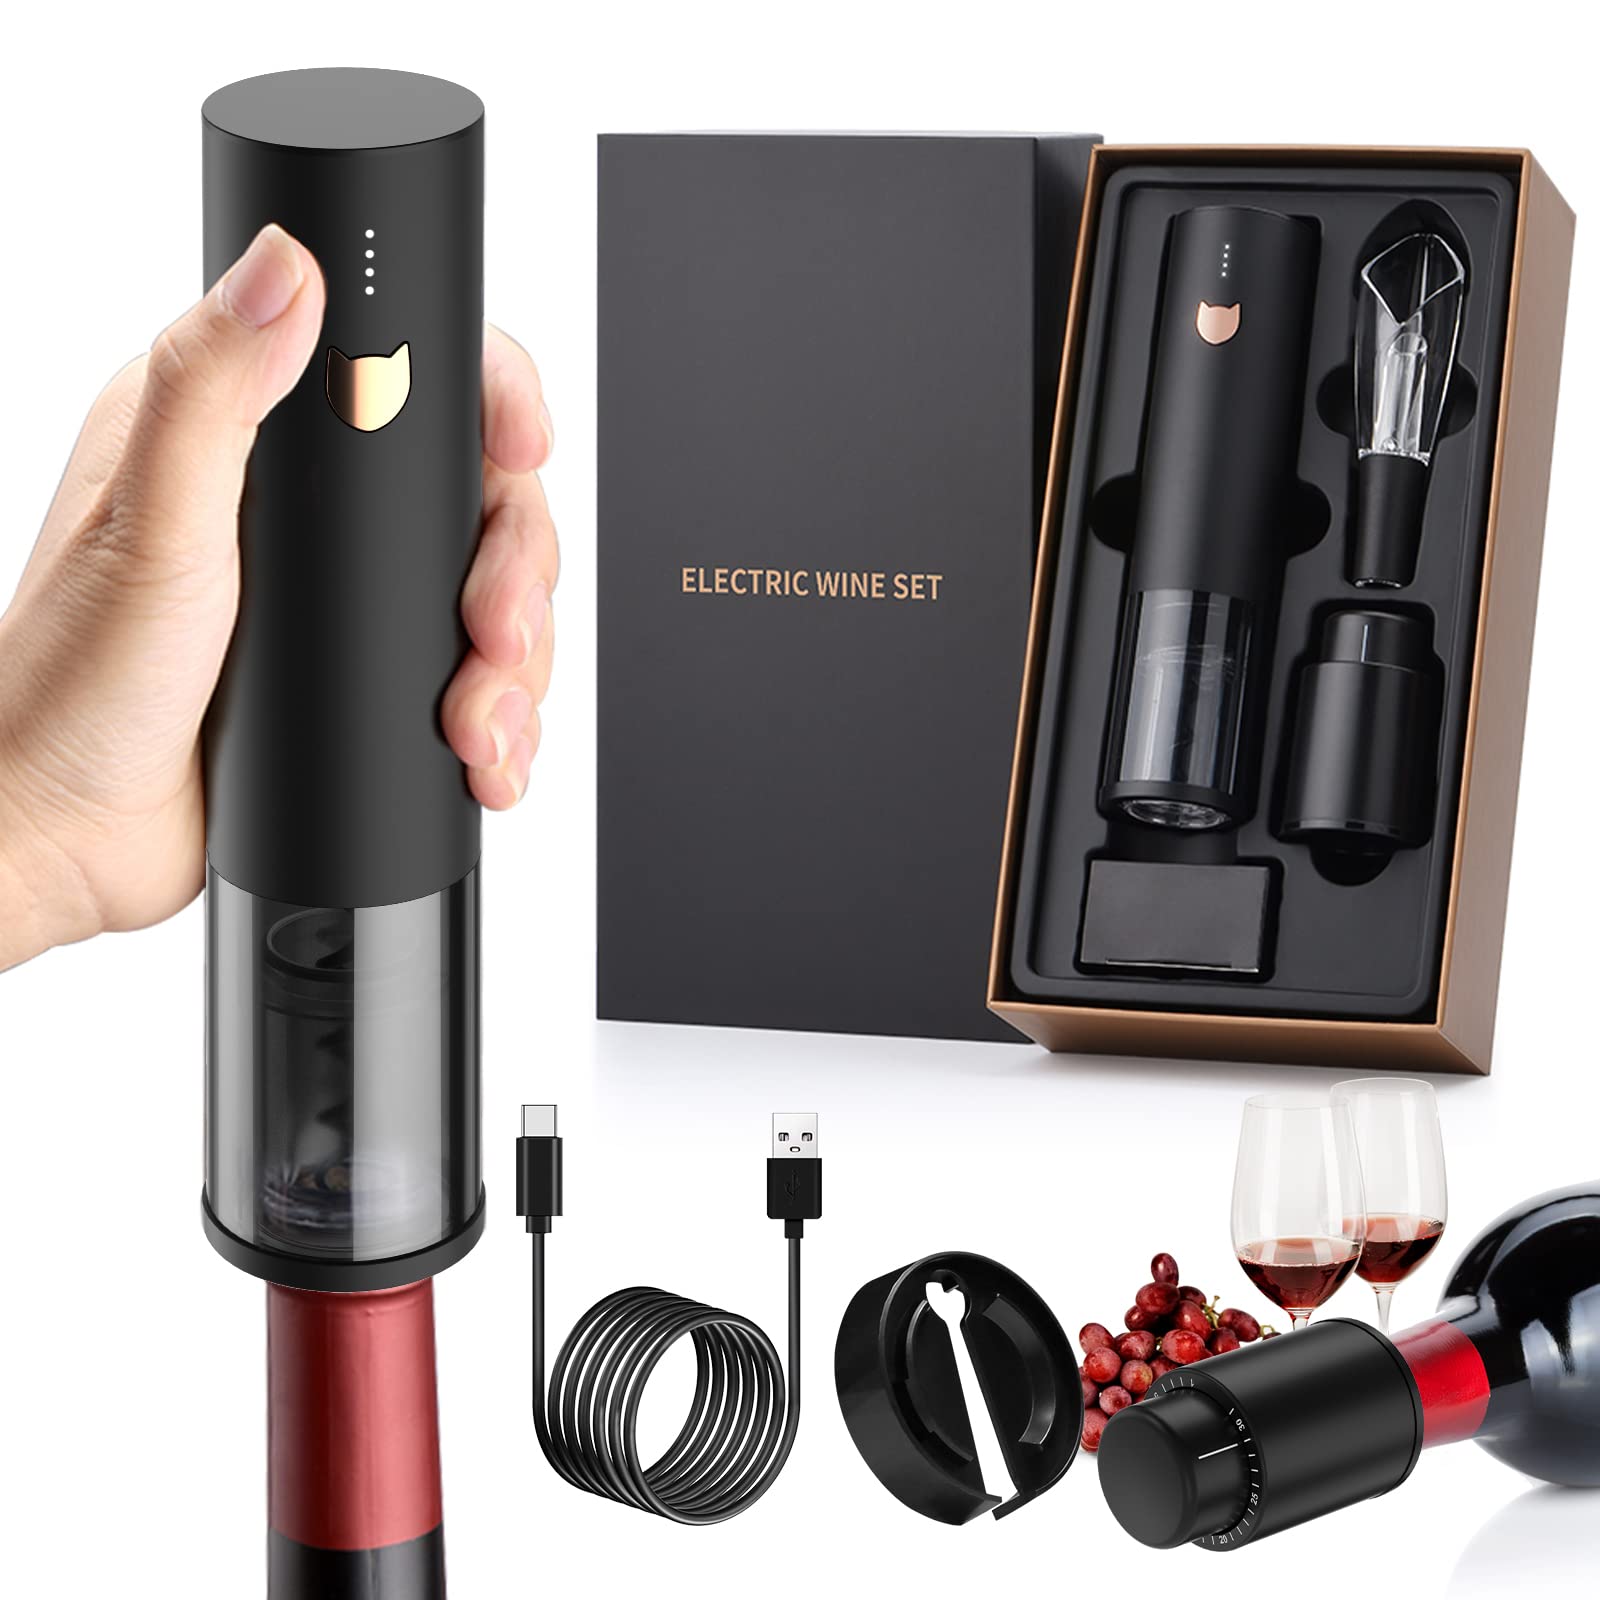 Rocyis Electric Wine Opener-Wine gifts-Automatic Wine Opener Rechargeable-cordless Electric corkscrew-Wine Bottle Opener with Foil cutt